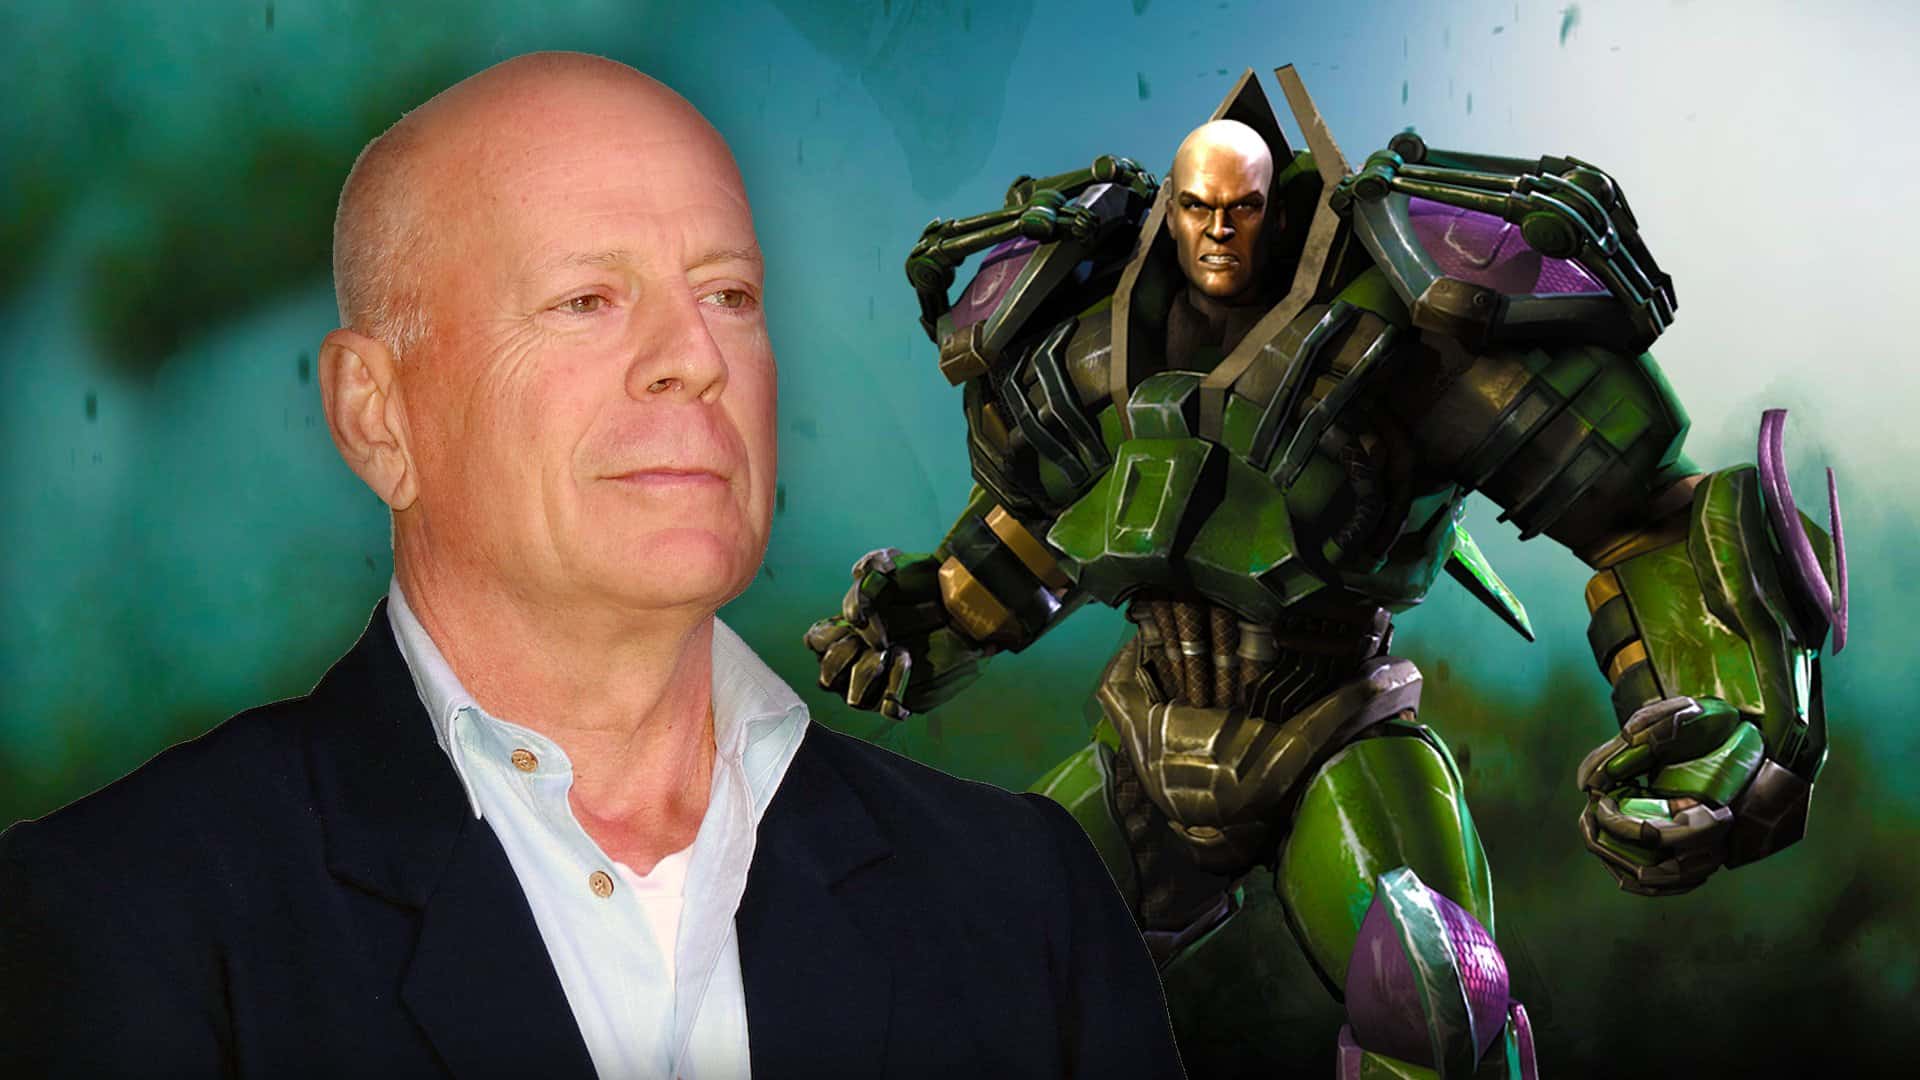 Bruce Willis Would Have Been An Amazing Lex Luthor In An Injustice Movie